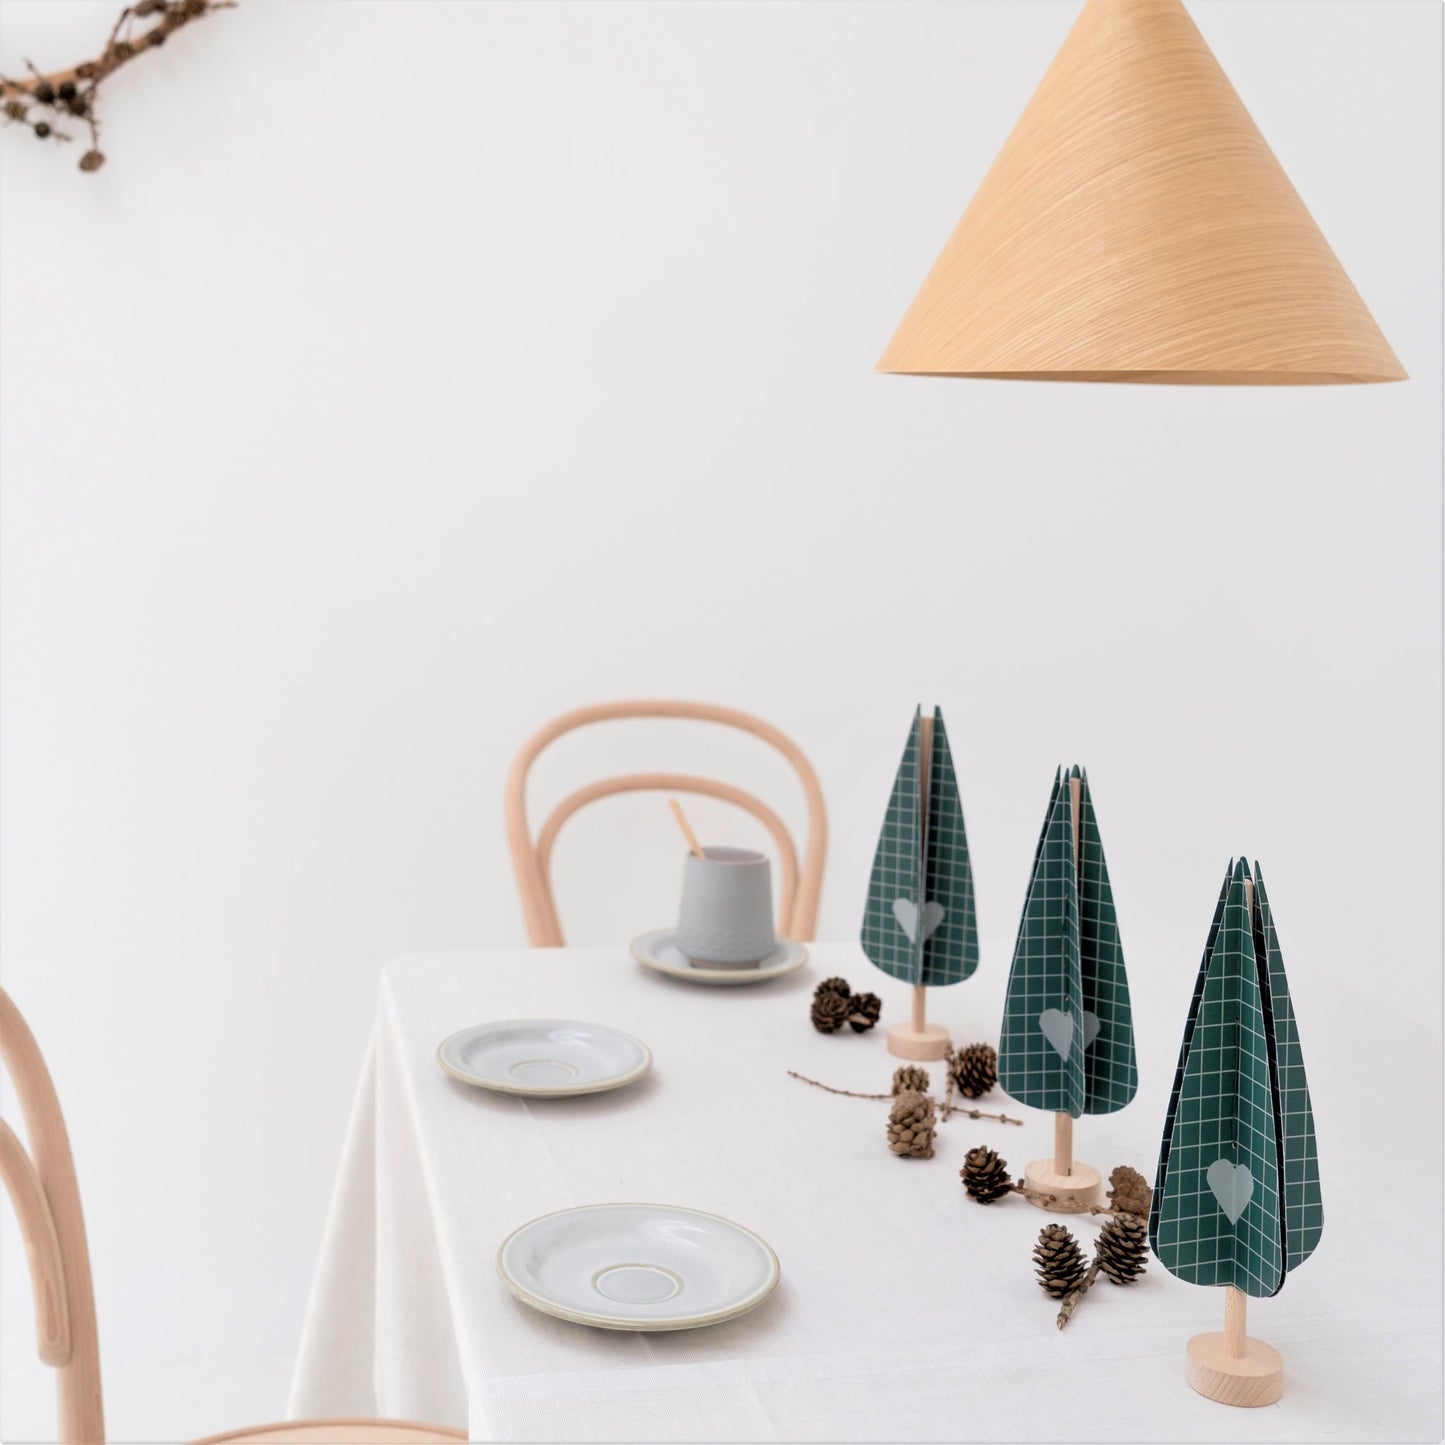 paper craft kit of a dark green cypress tree by Jurianne Matter, pictured on a table